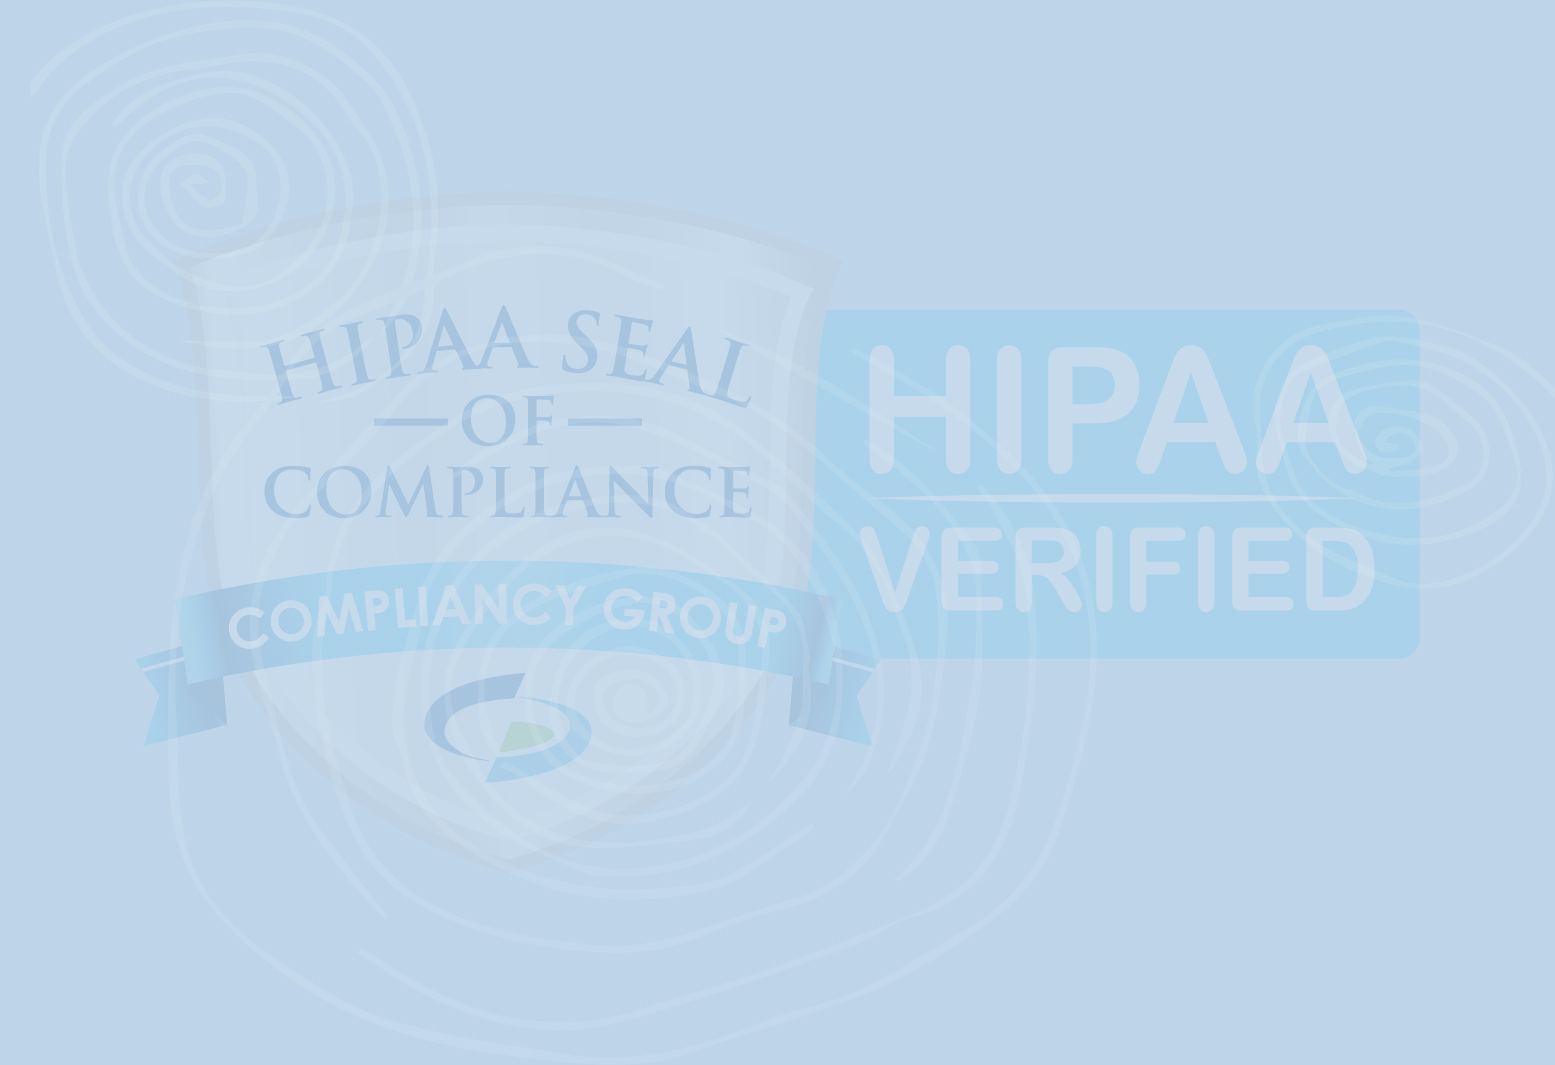 Endeavor awarded the HIPAA Seal of Compliance